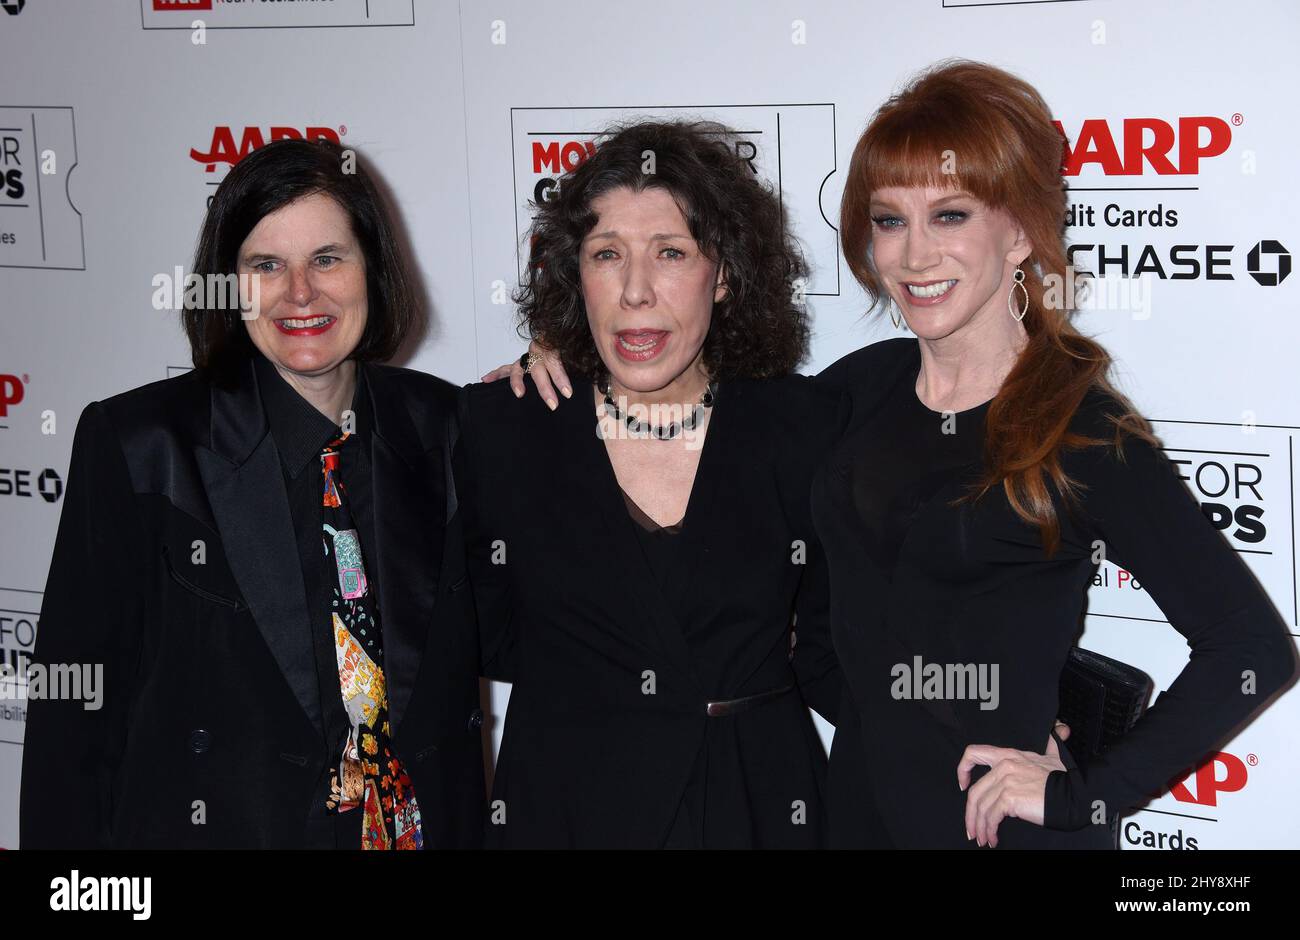 Paula Poundstone, Lily Tomlin and Kathy Griffin attending the 15th Annual Movies For Grownups Awards held at the Beverly Wilshire Hotel in Los Angeles, USA. Stock Photo